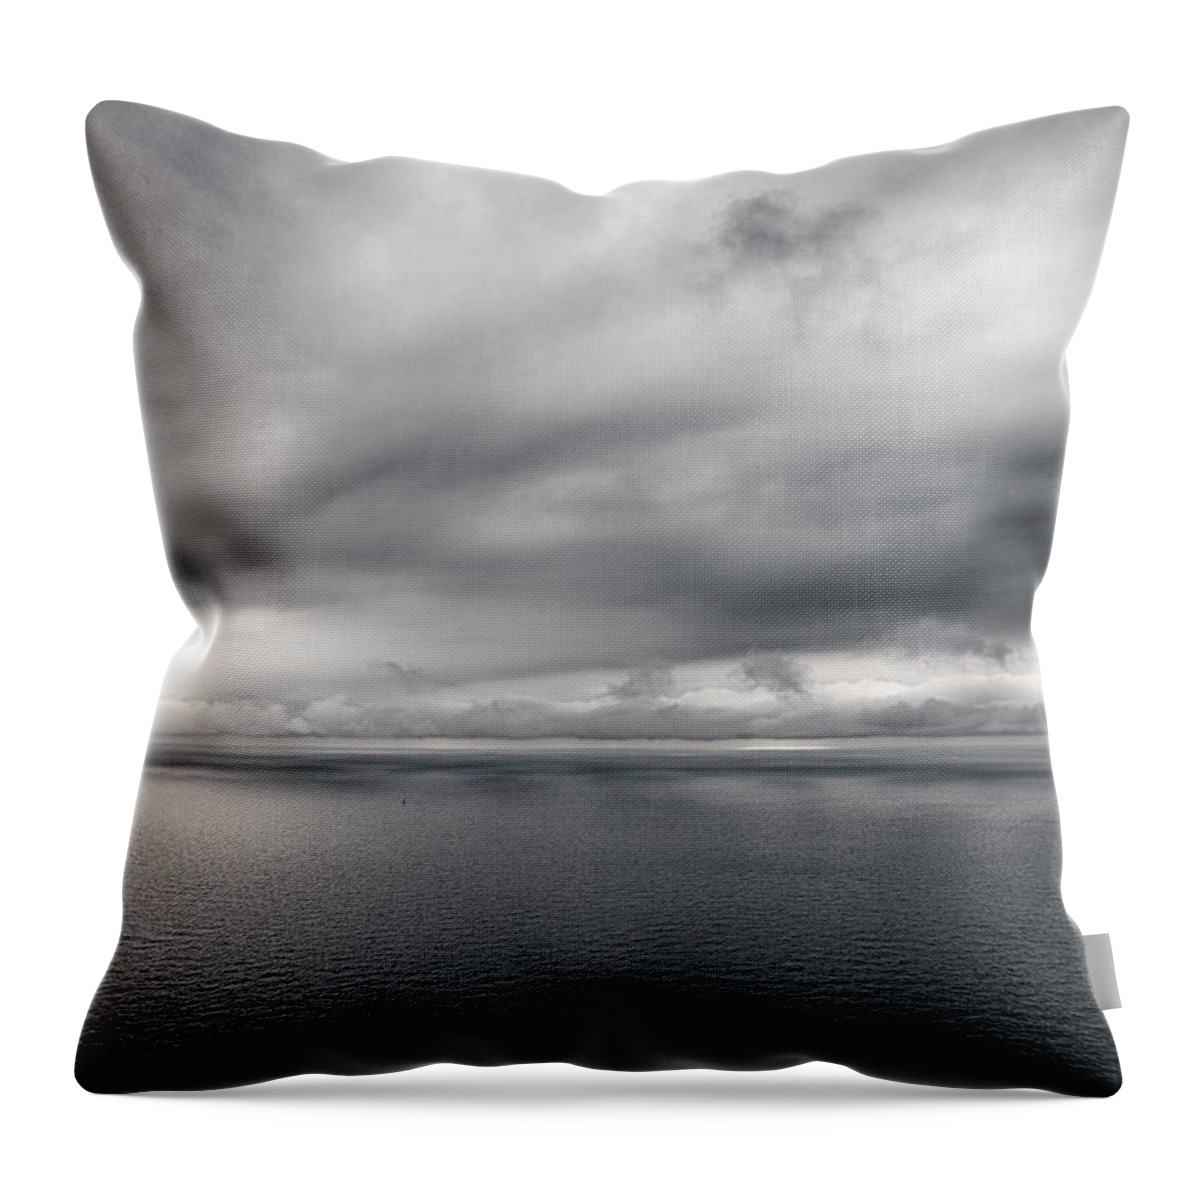 Tranquility Throw Pillow featuring the photograph Seascape France by Devon Strong